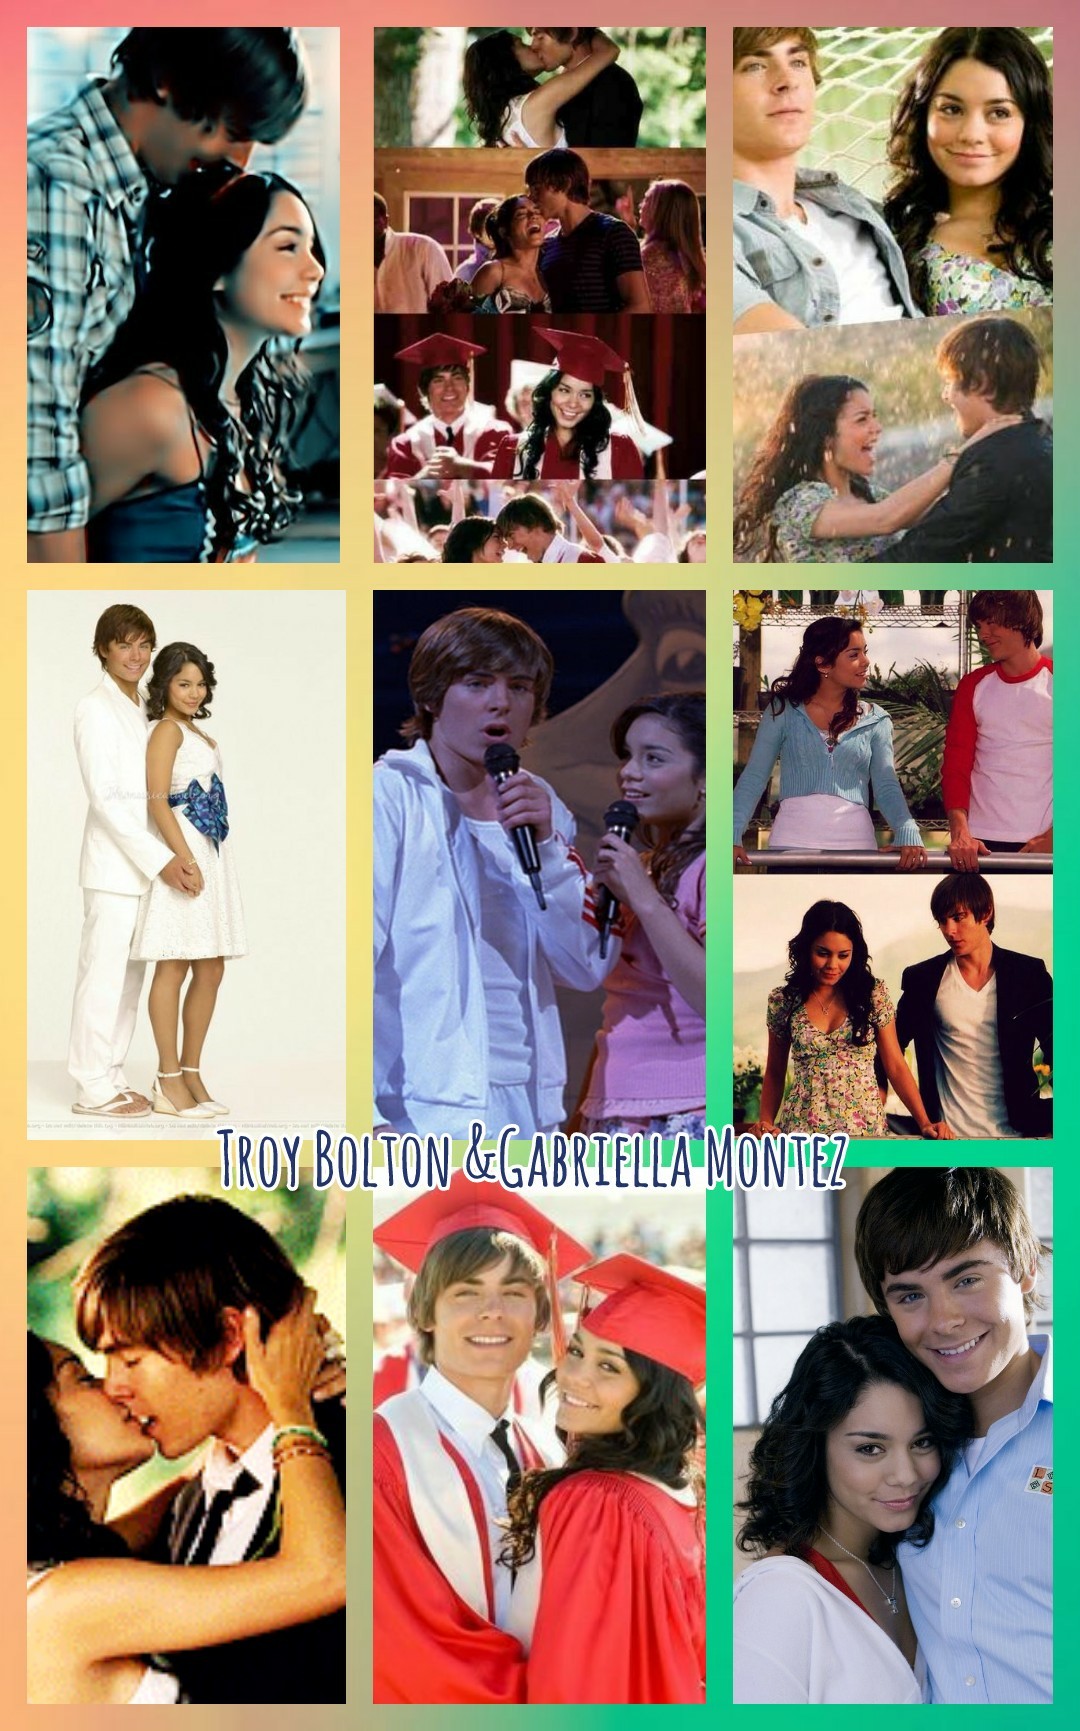 Troy Bolton &Gabriella Montez. And this is and inspiration of High School Musical 